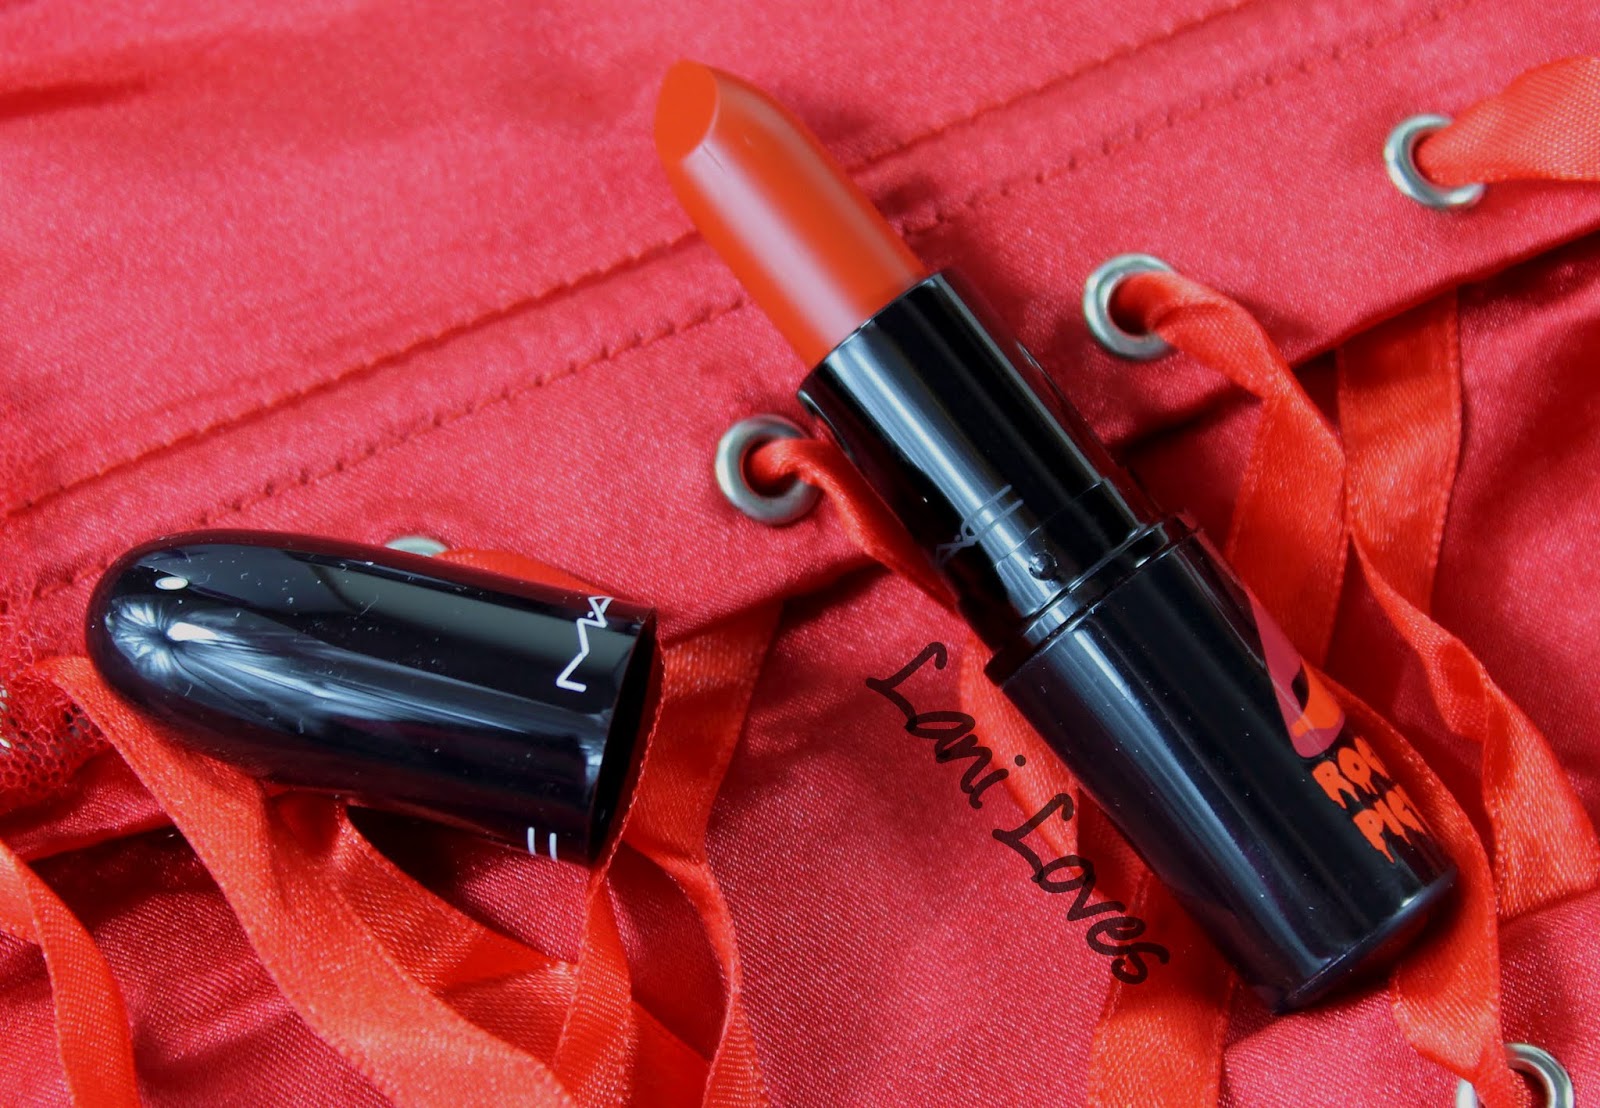 MAC X Rocky Horror Picture Show Lipsticks: Strange Journey Swatches & Review